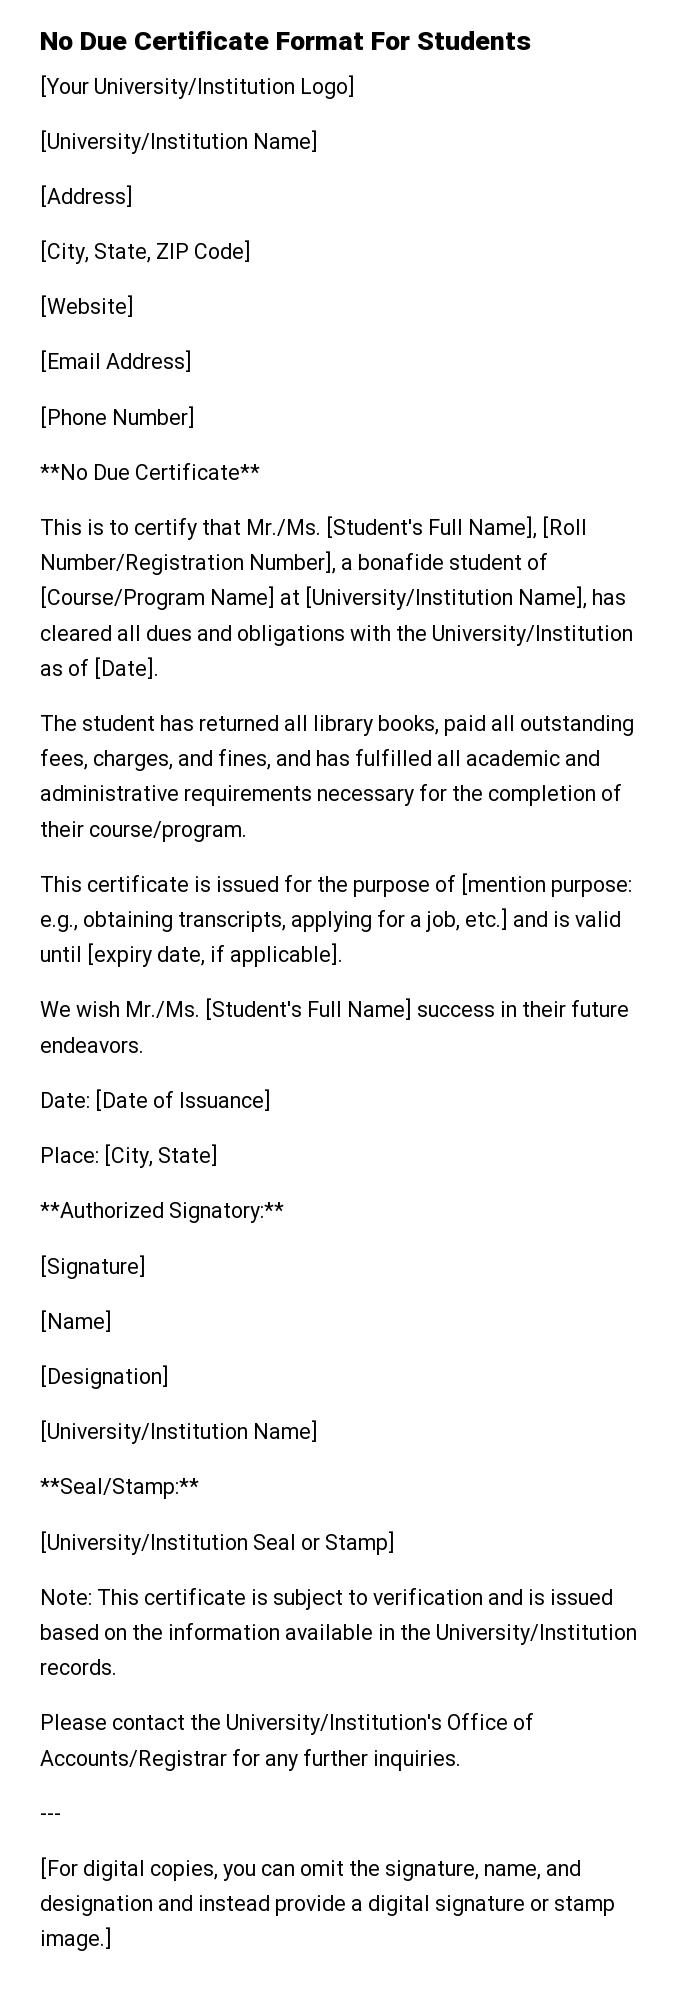 No Due Certificate Format For Students